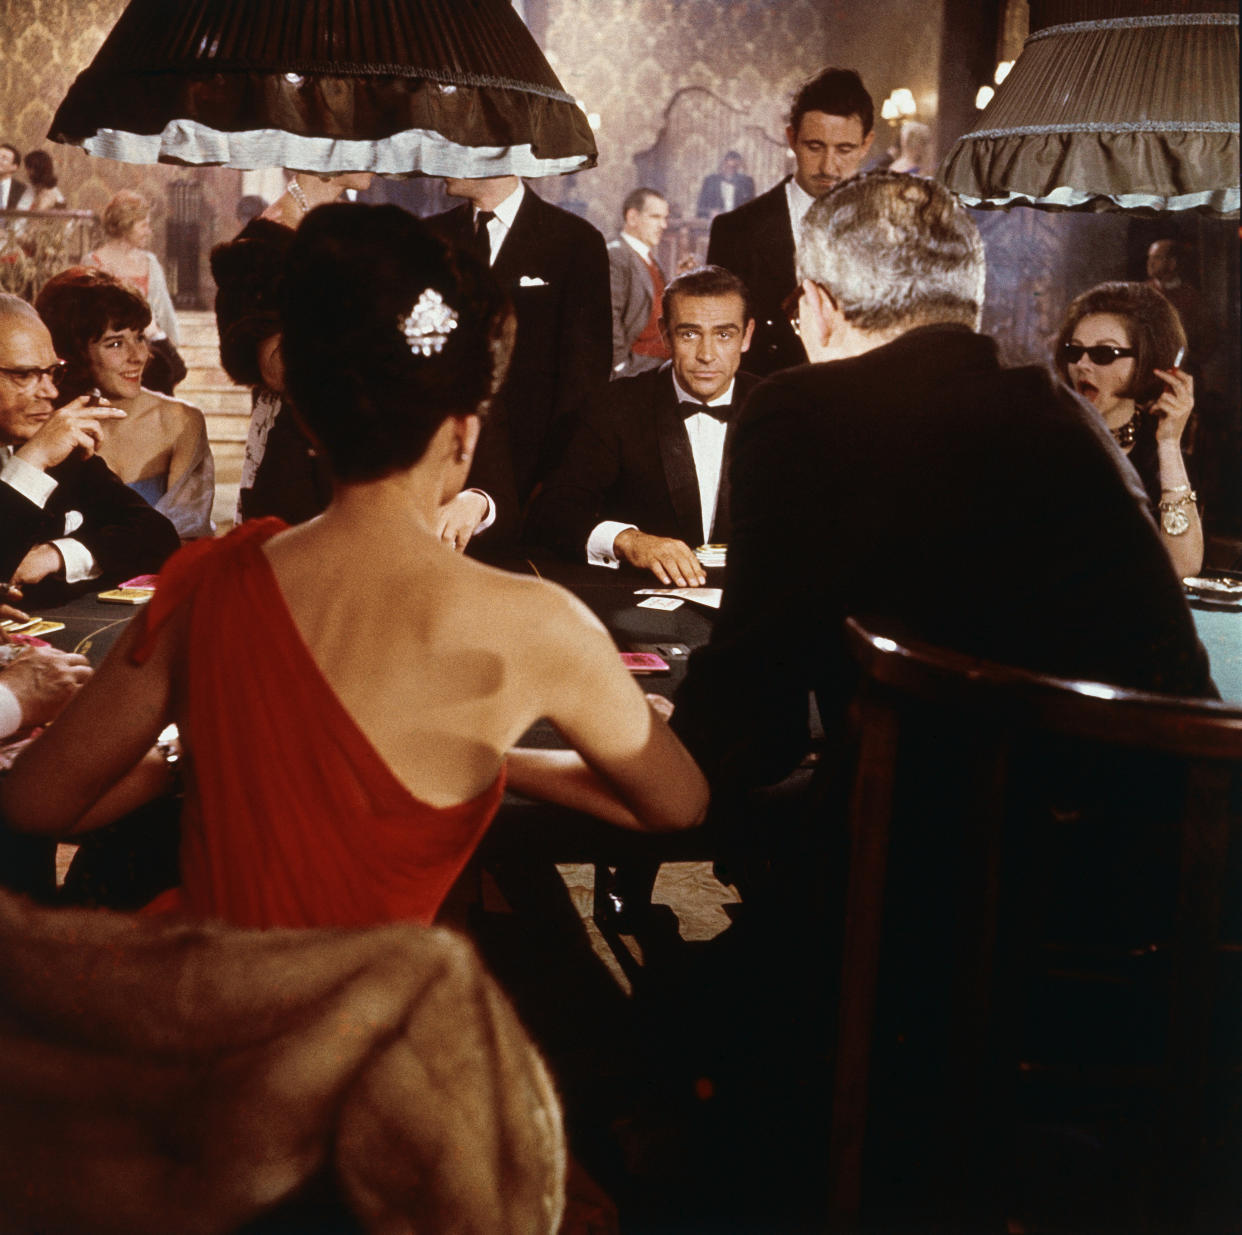 Scottish actor Sean Connery (center) as fictional secret agent James Bond sits at a casino card table in a scene from the film 'Dr. No,' directed by Terence Young, 1962. British actress Eunice Gayson sits with her back to the camera in a red, off the shoulder dress. (Photo by MGM Studios/Courtesy of Getty Images)